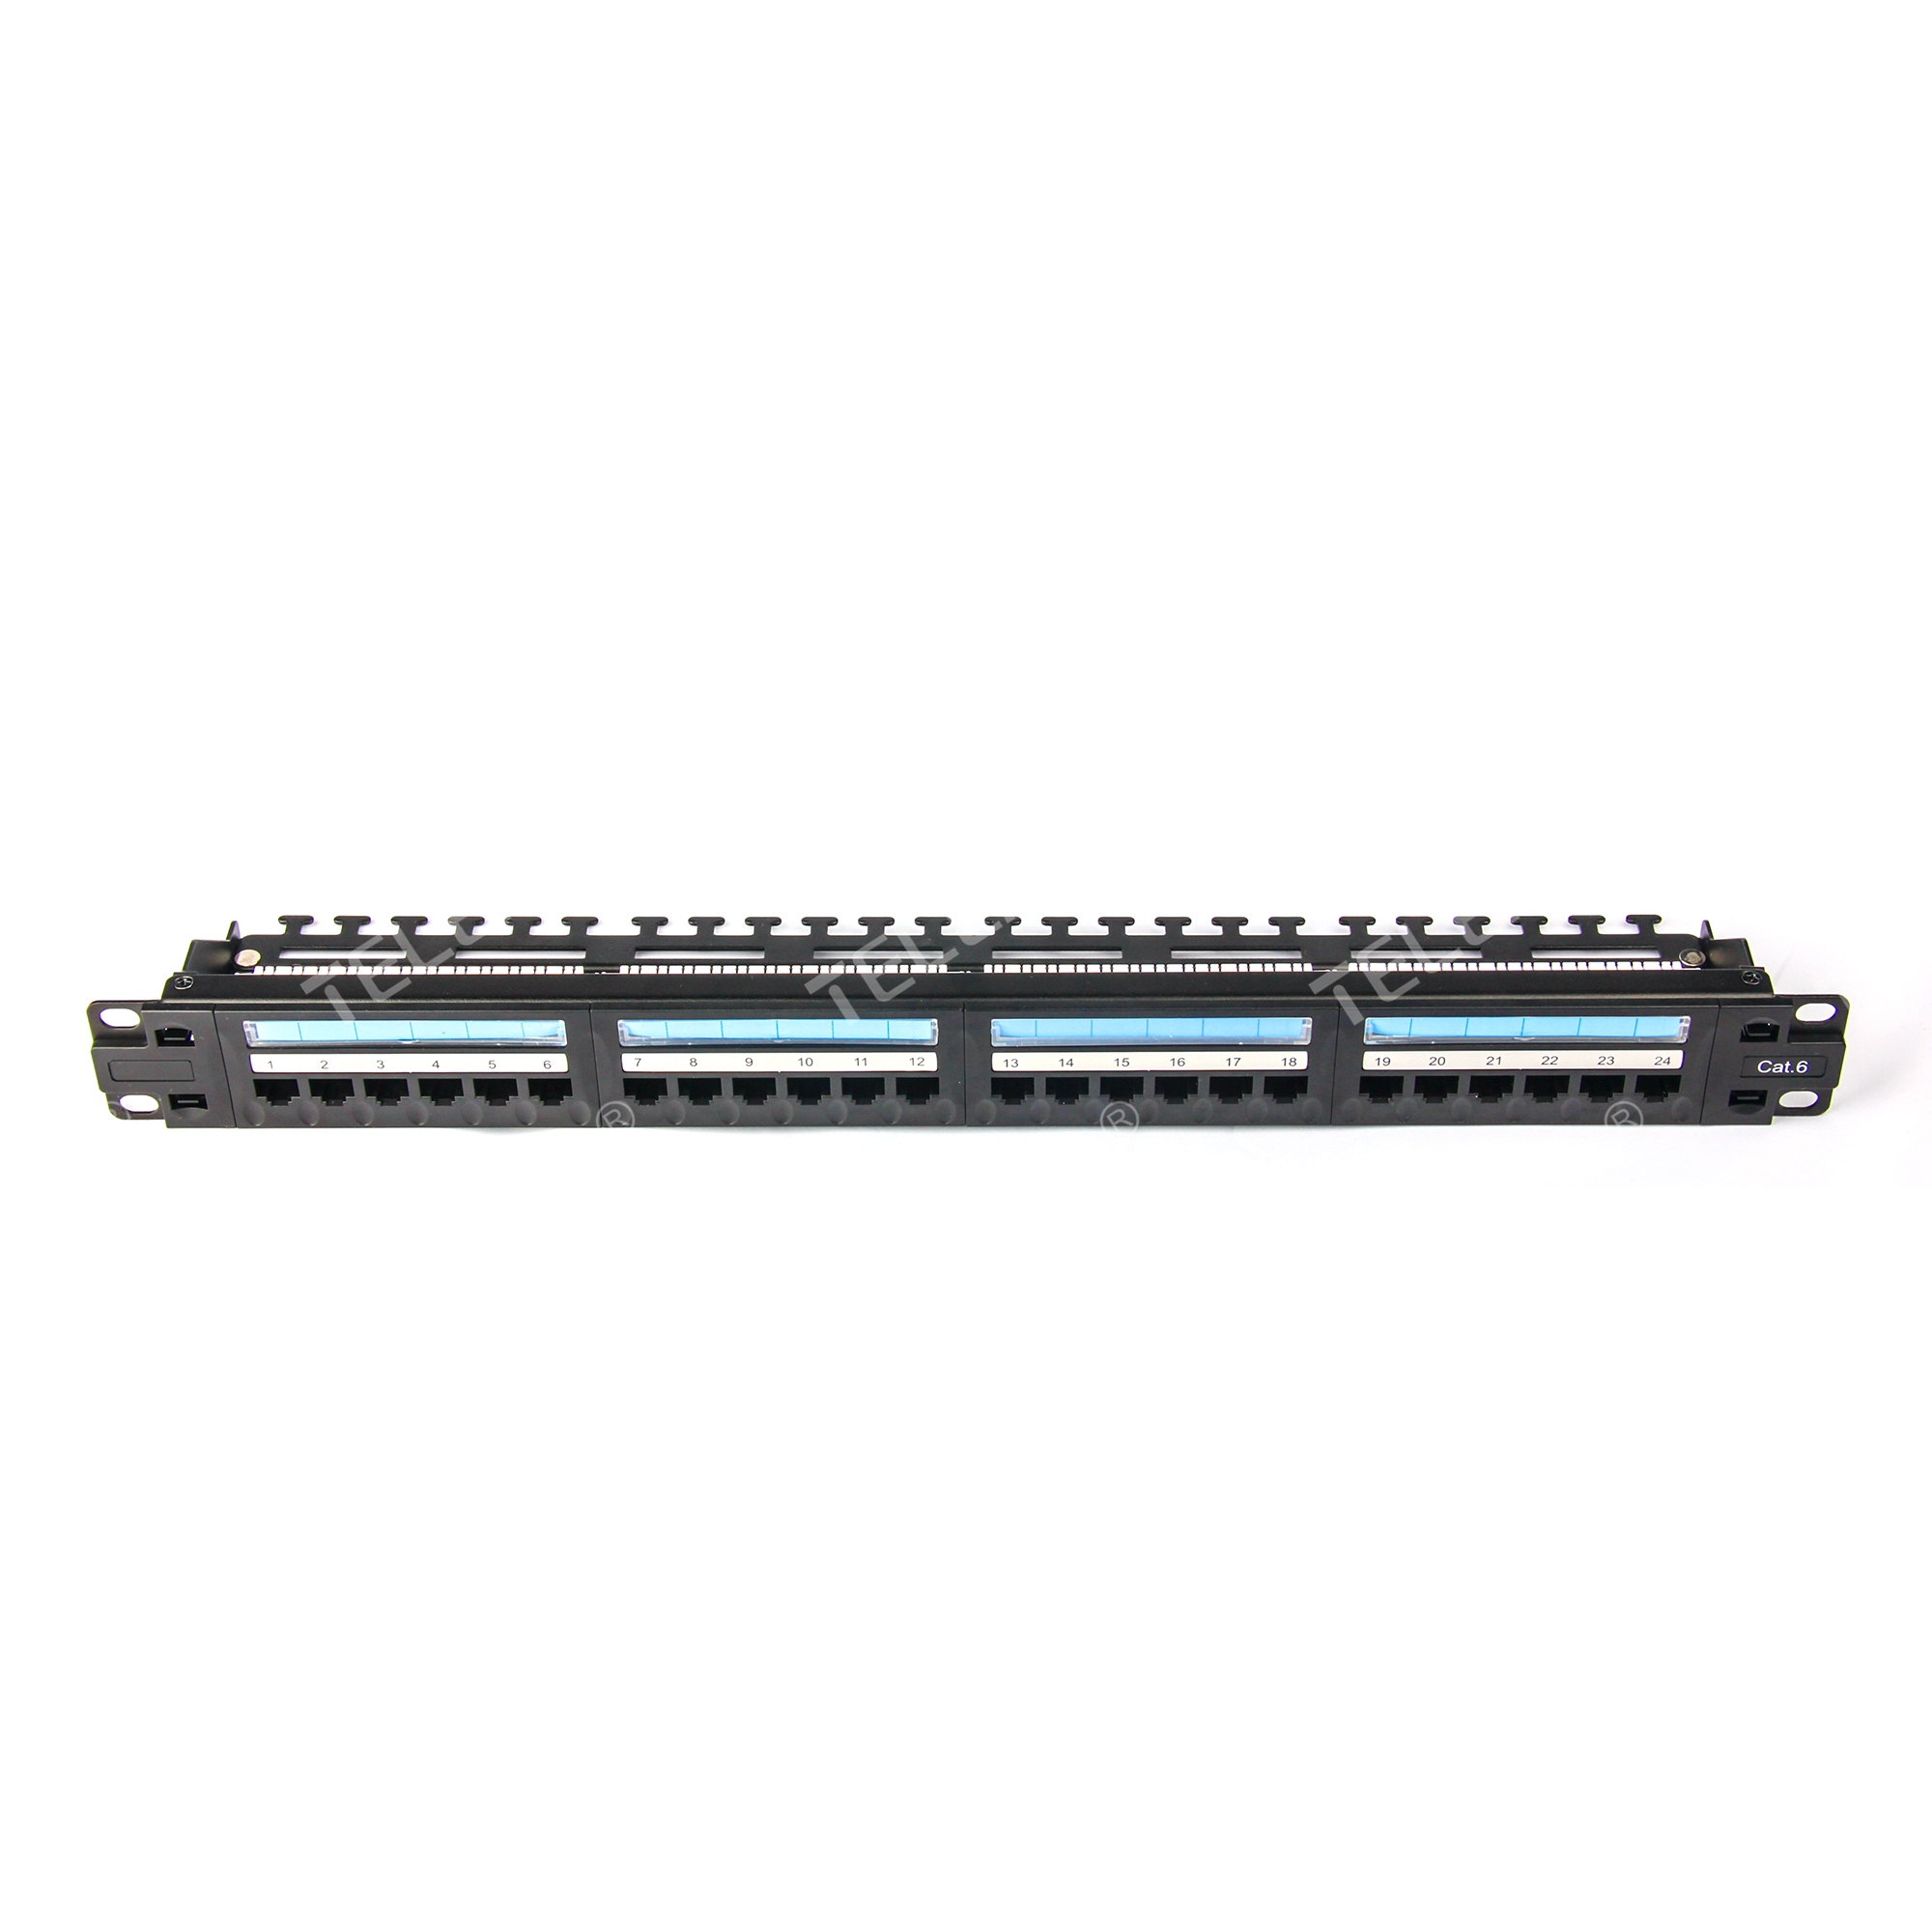 Cat 6 / Cat 6a UTP Patch Panel 24 Ports, front removed design